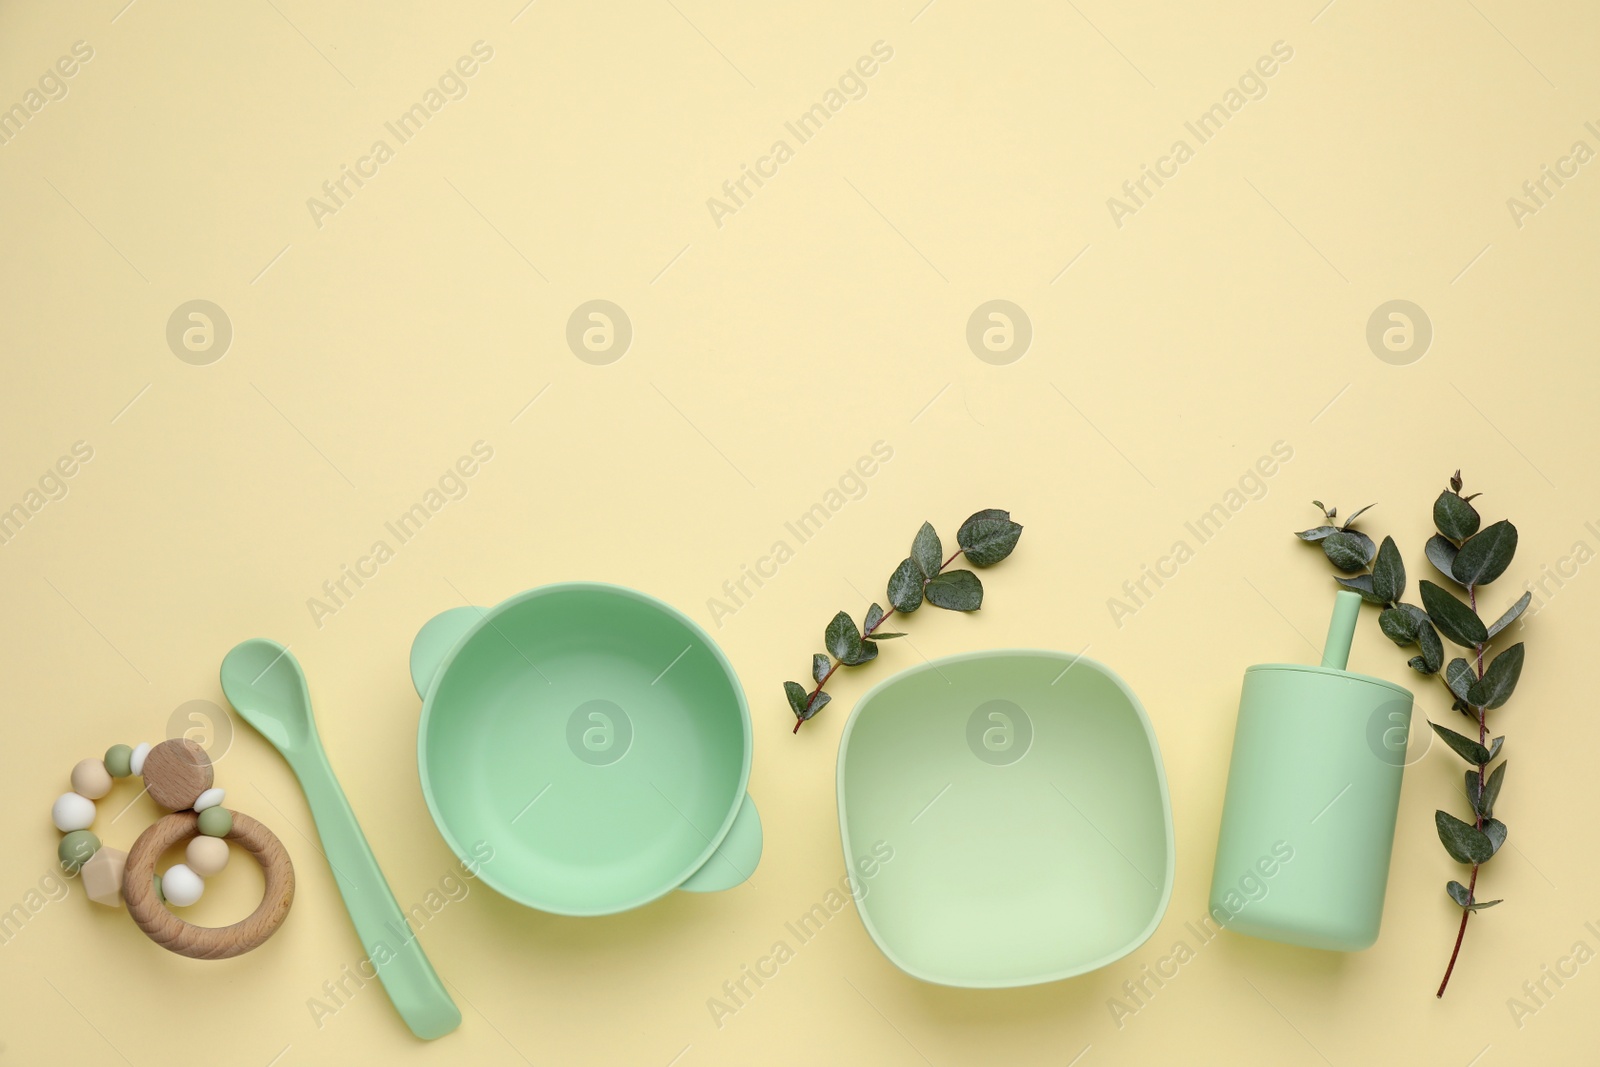 Photo of Set of plastic dishware and wooden toy on beige background, flat lay with space for text. Serving baby food